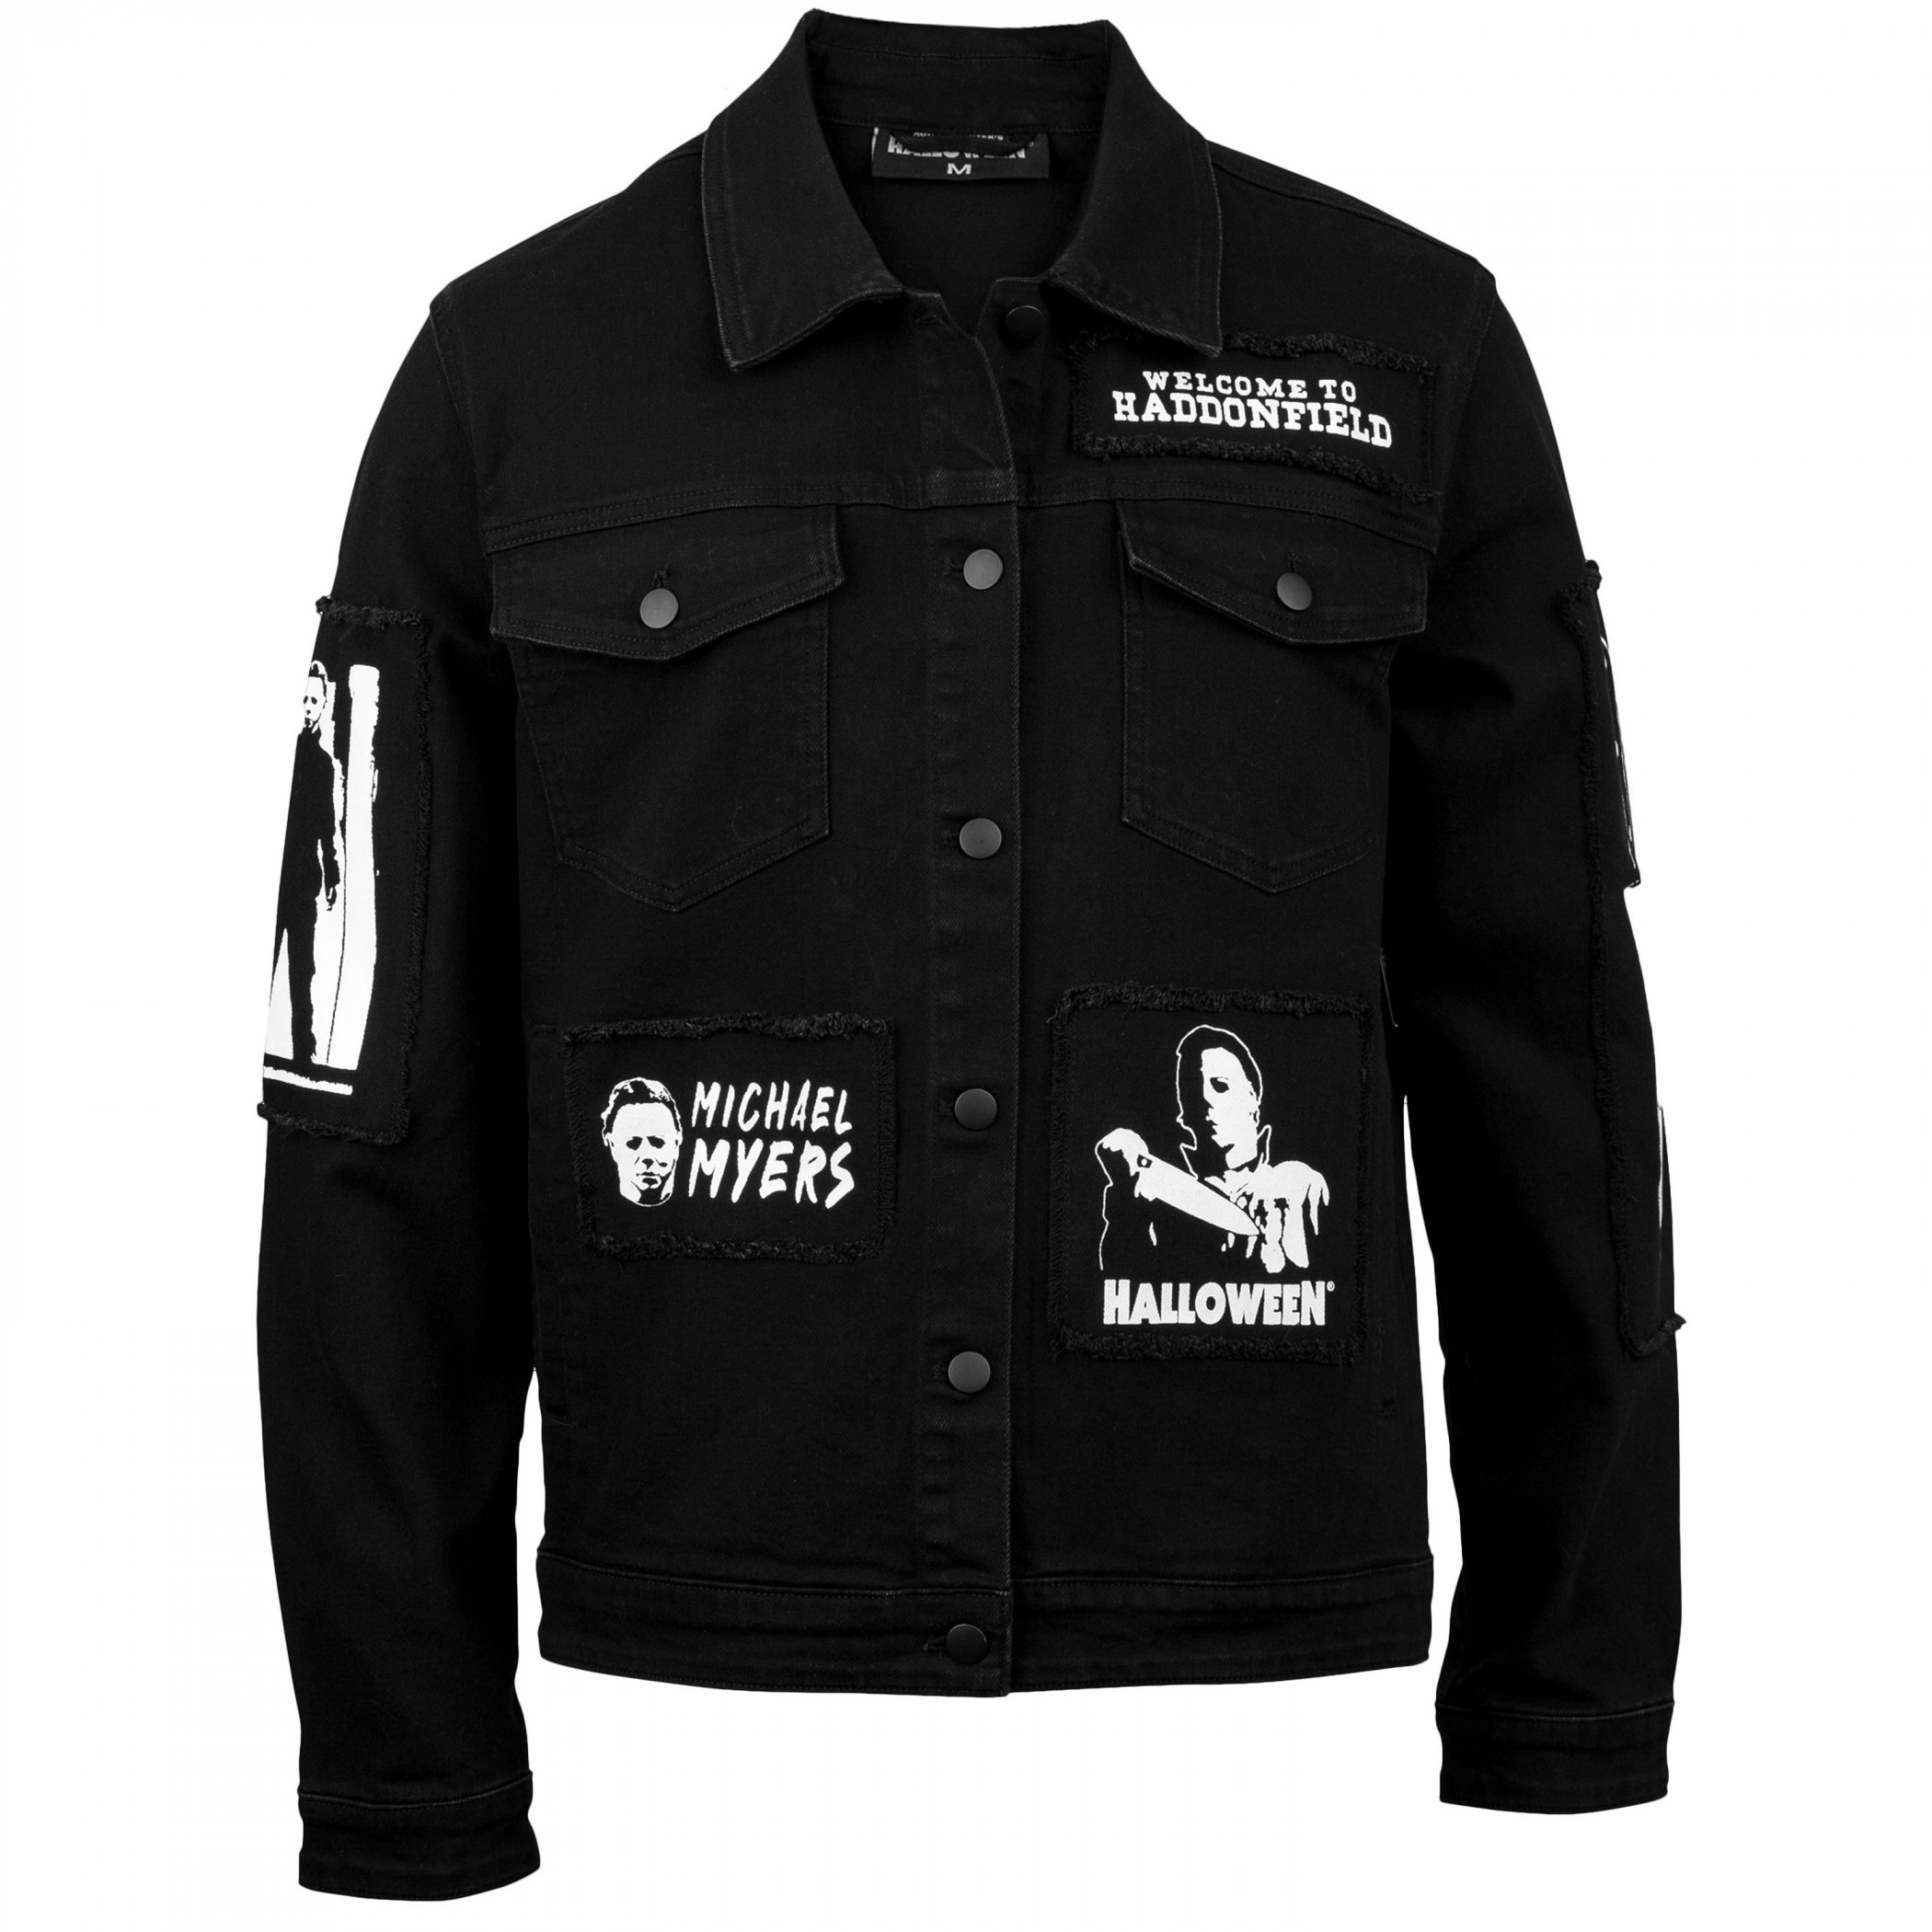 Halloween Michael Meyers Denim Jacket with Sewn Patches